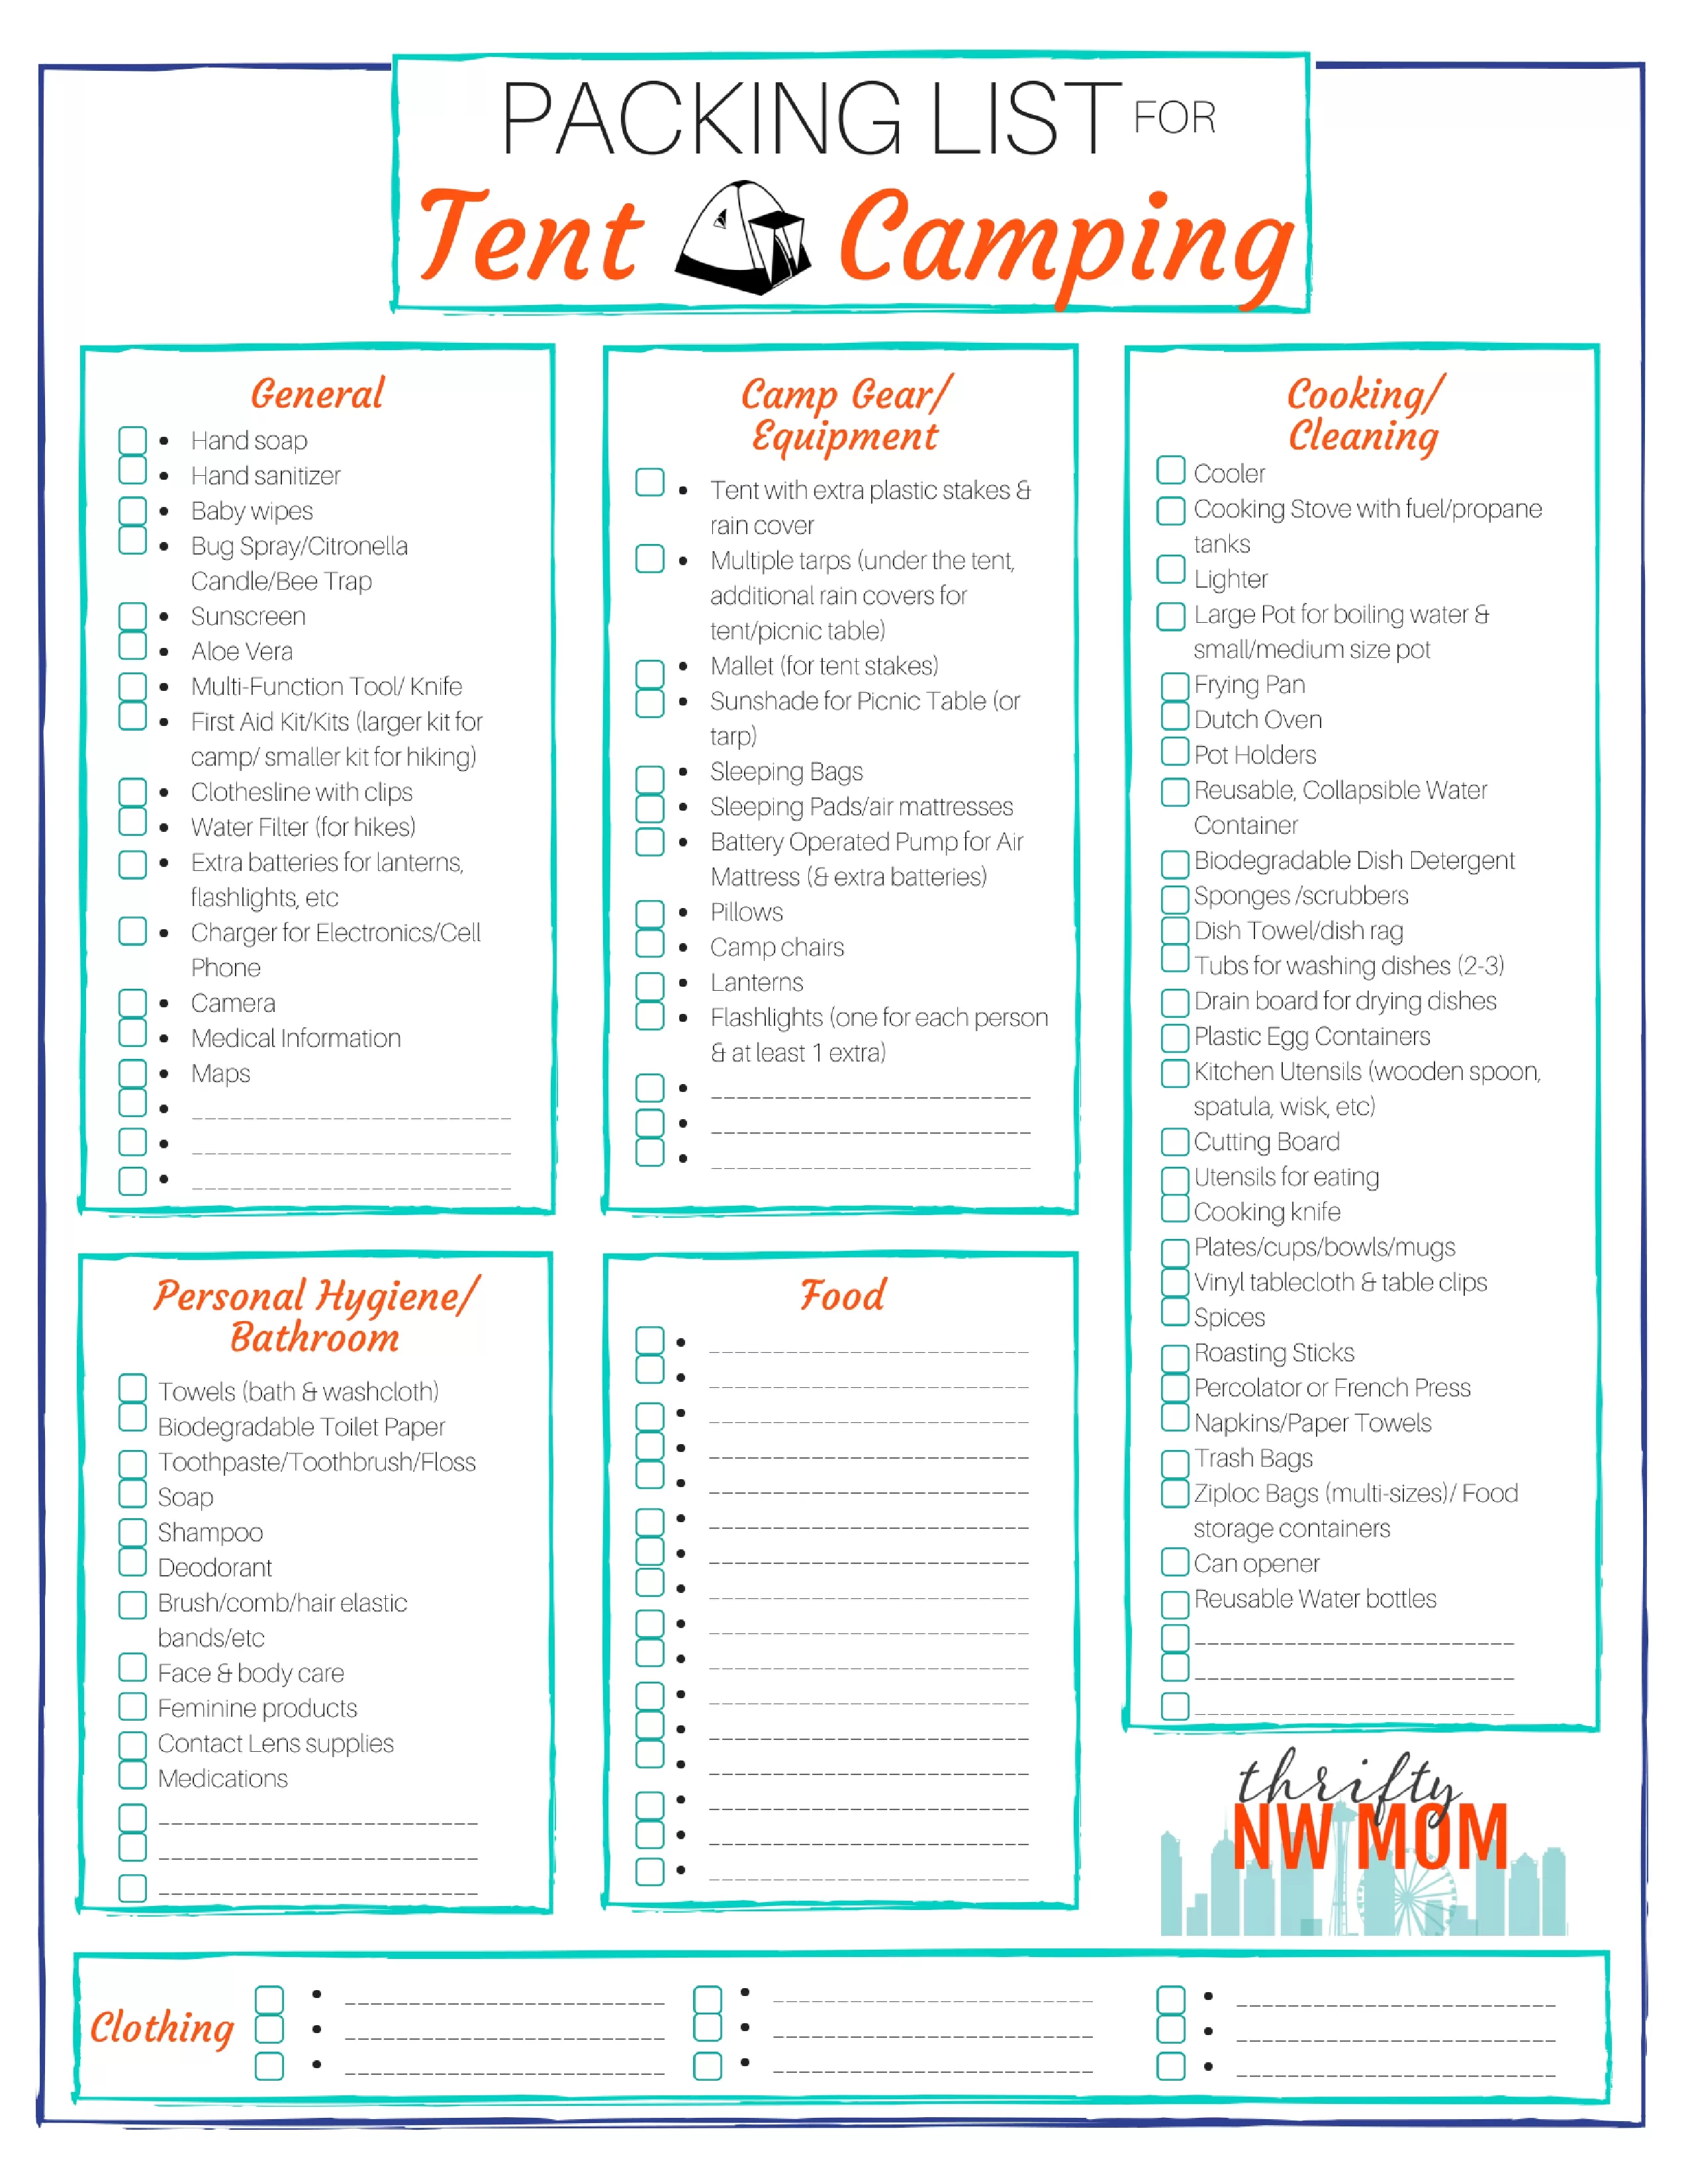 Family Camping Checklist: A List of Camping Essentials